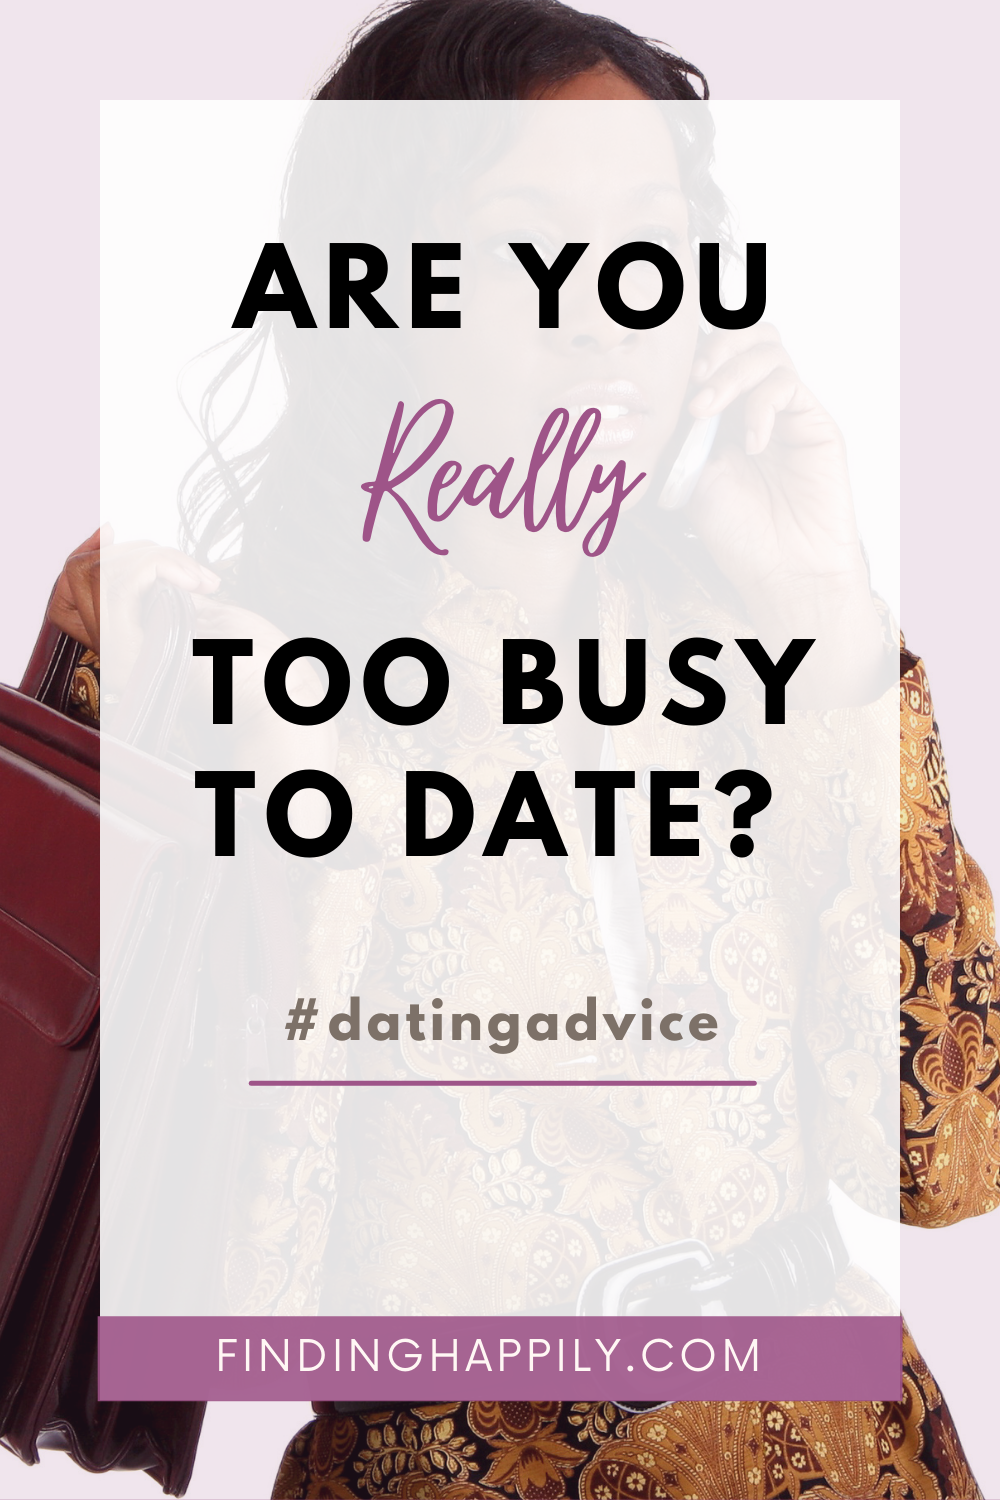 Are you really too busy to date?